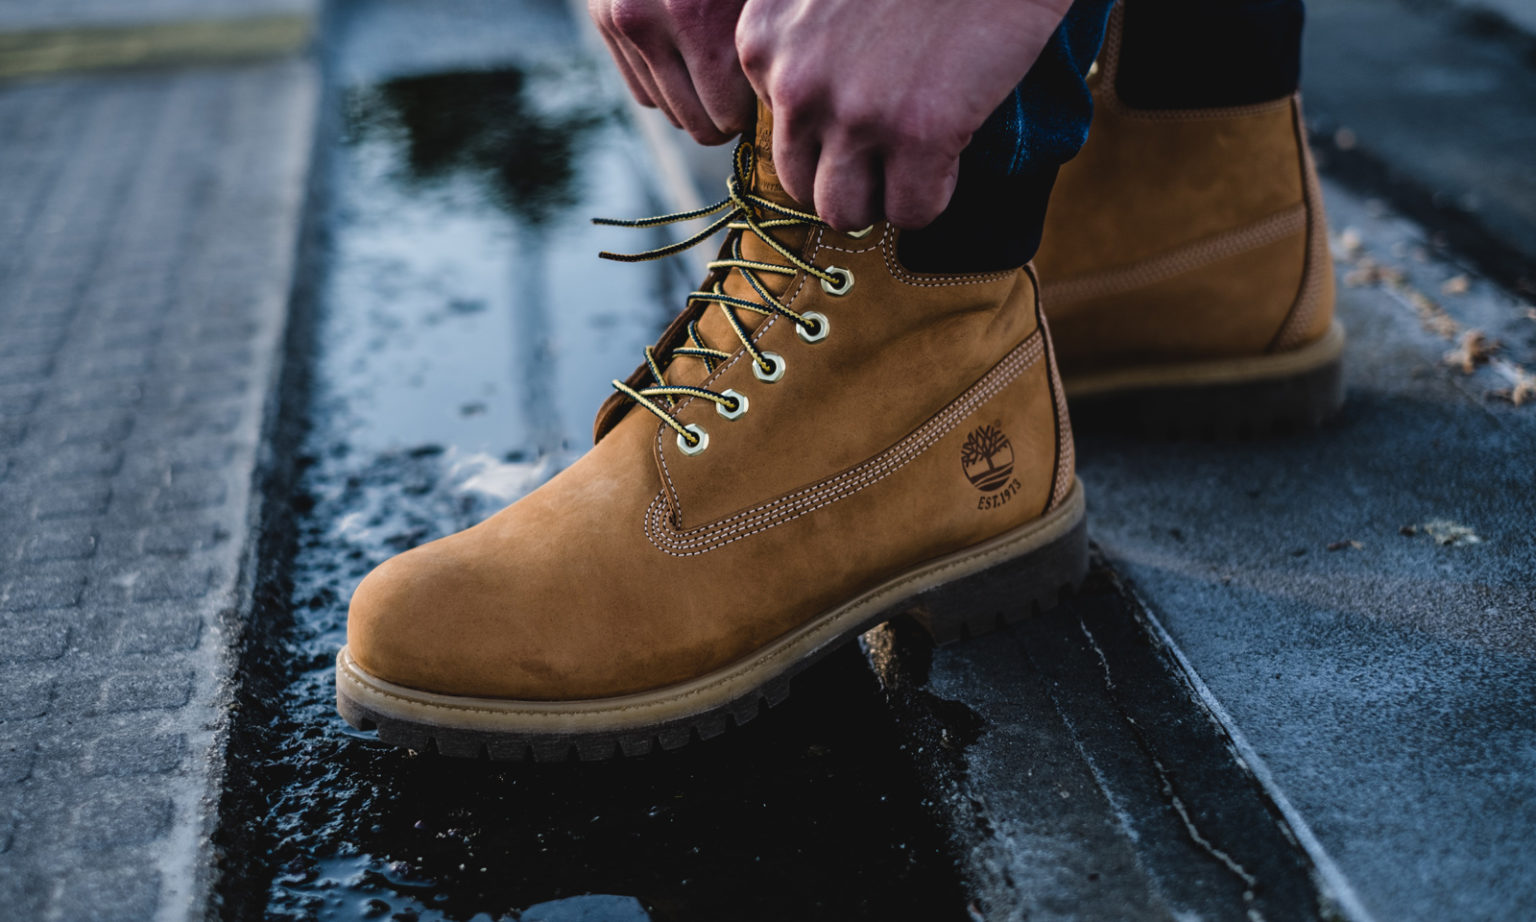 Alloy vs Steel Toe: Which One is the Best? - Shoe Adviser